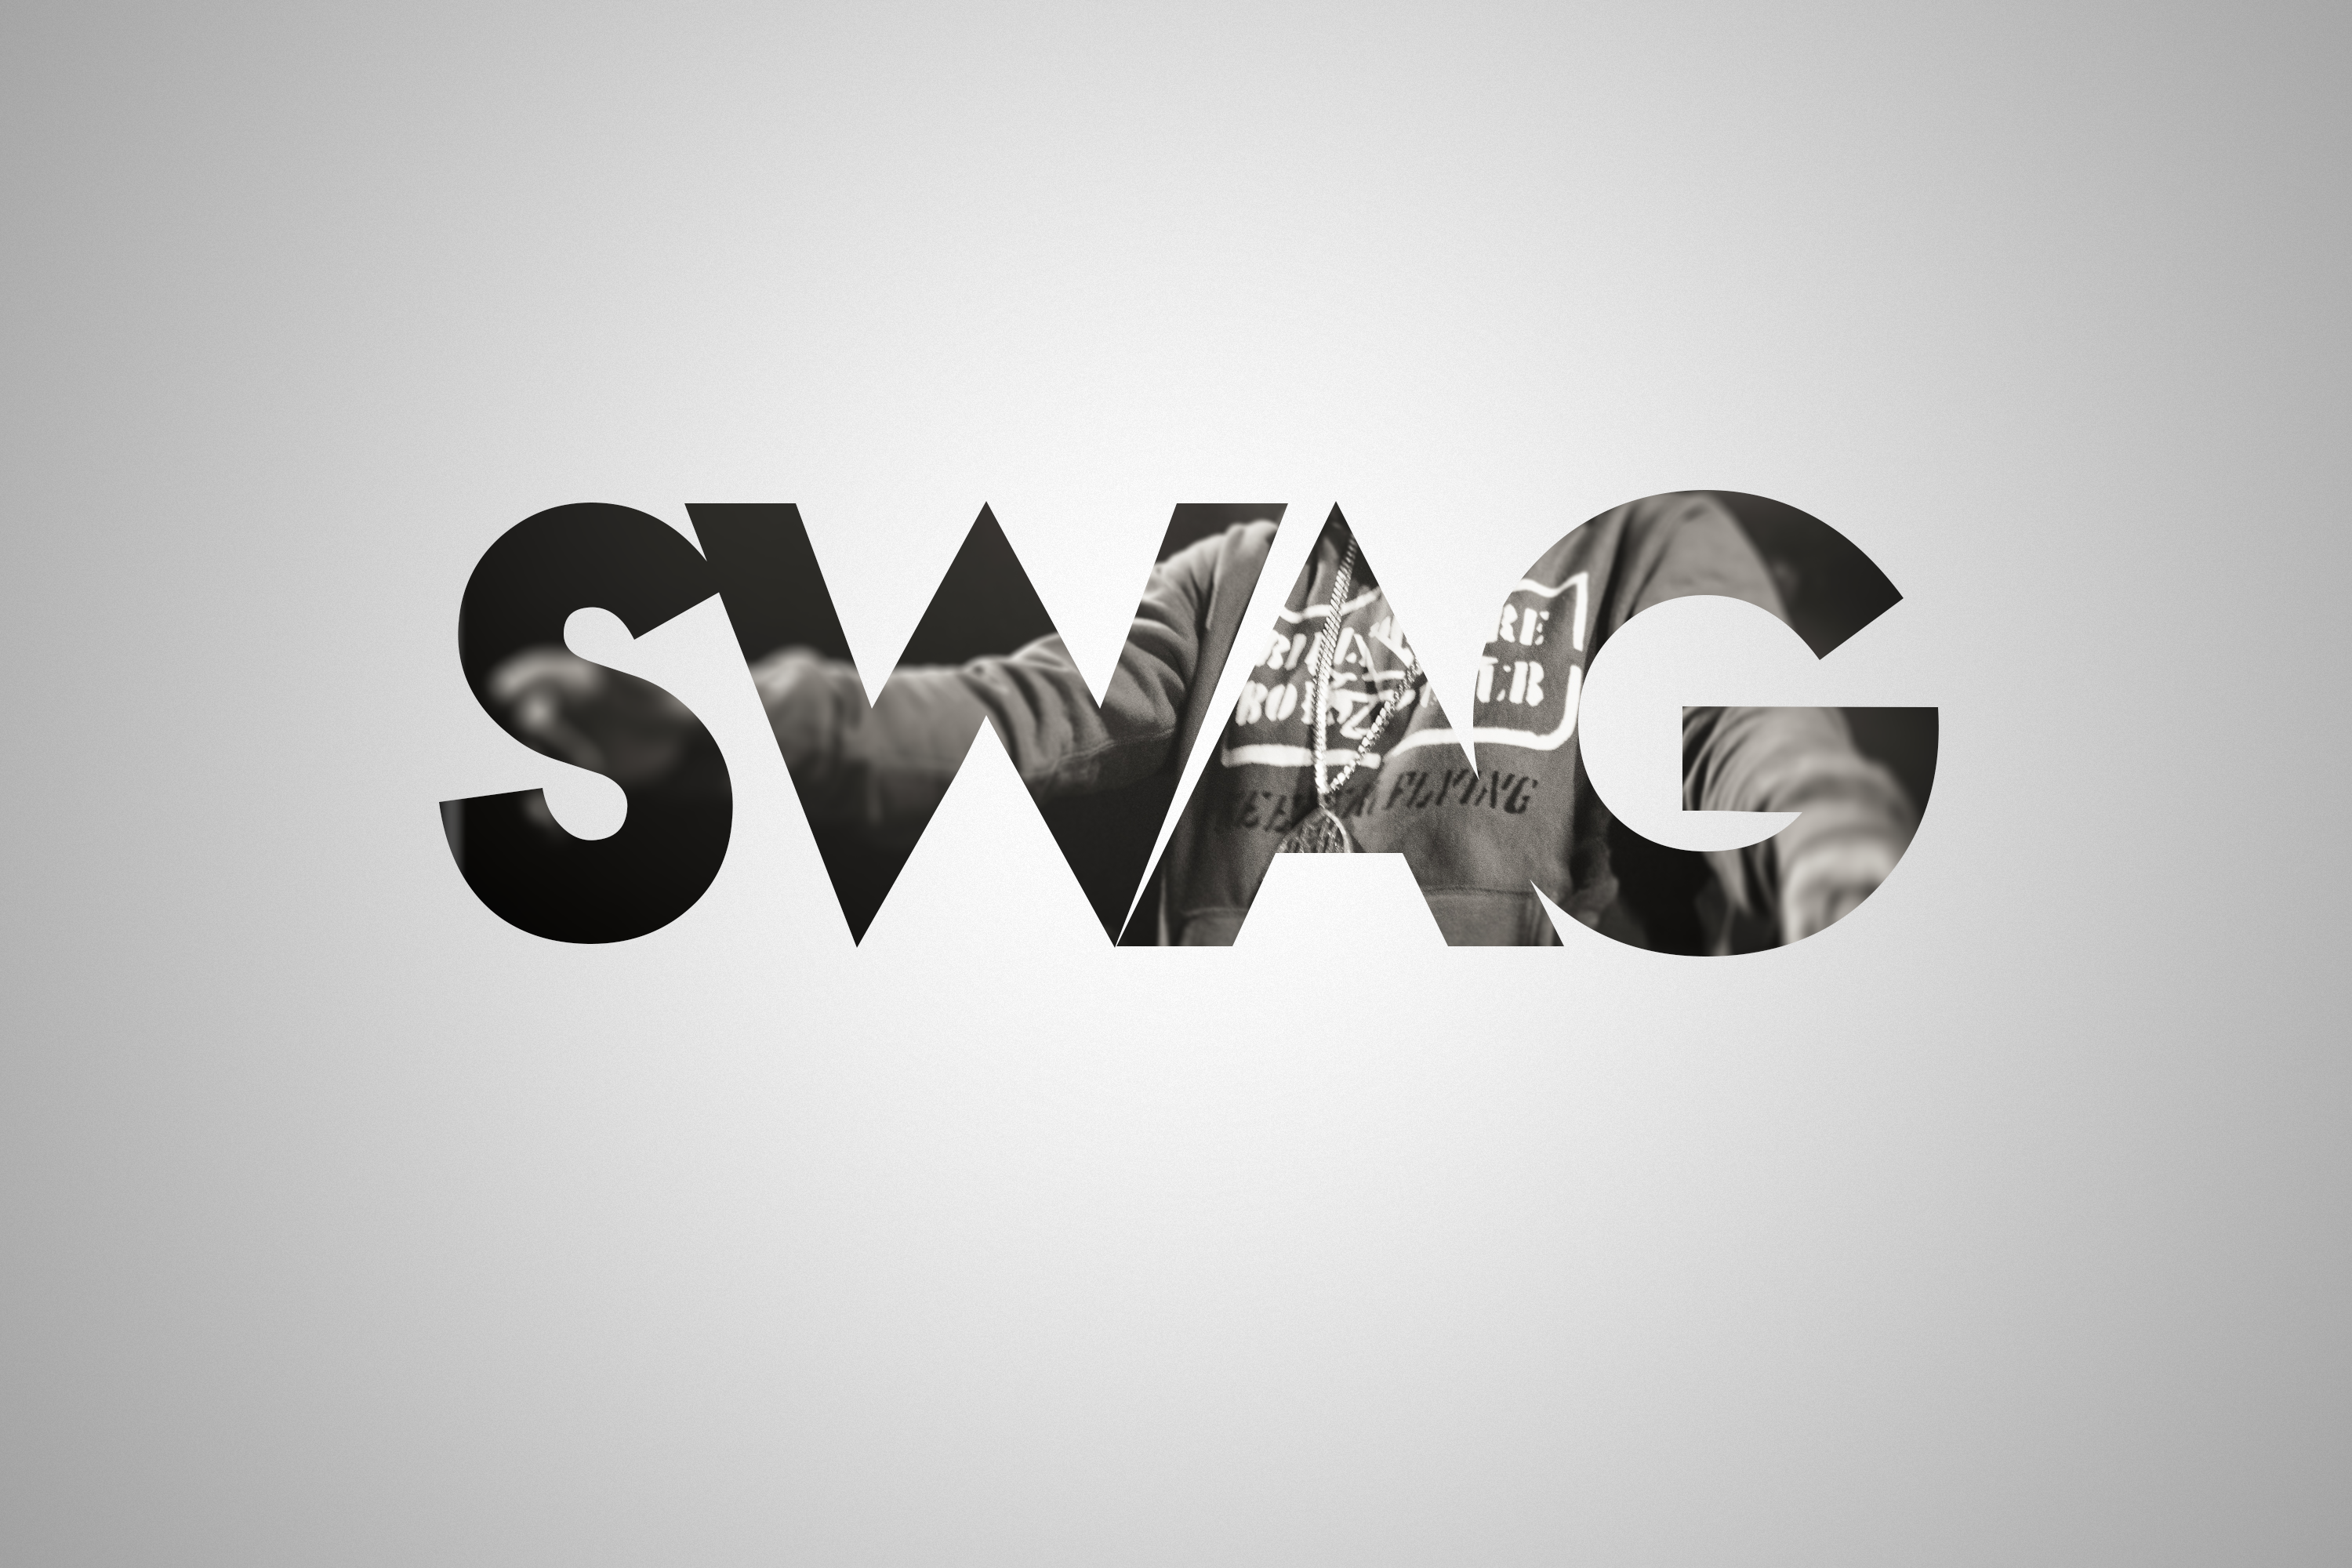 Swag Full HD Wallpaper and Background Image | 3000x2000 | ID:693665